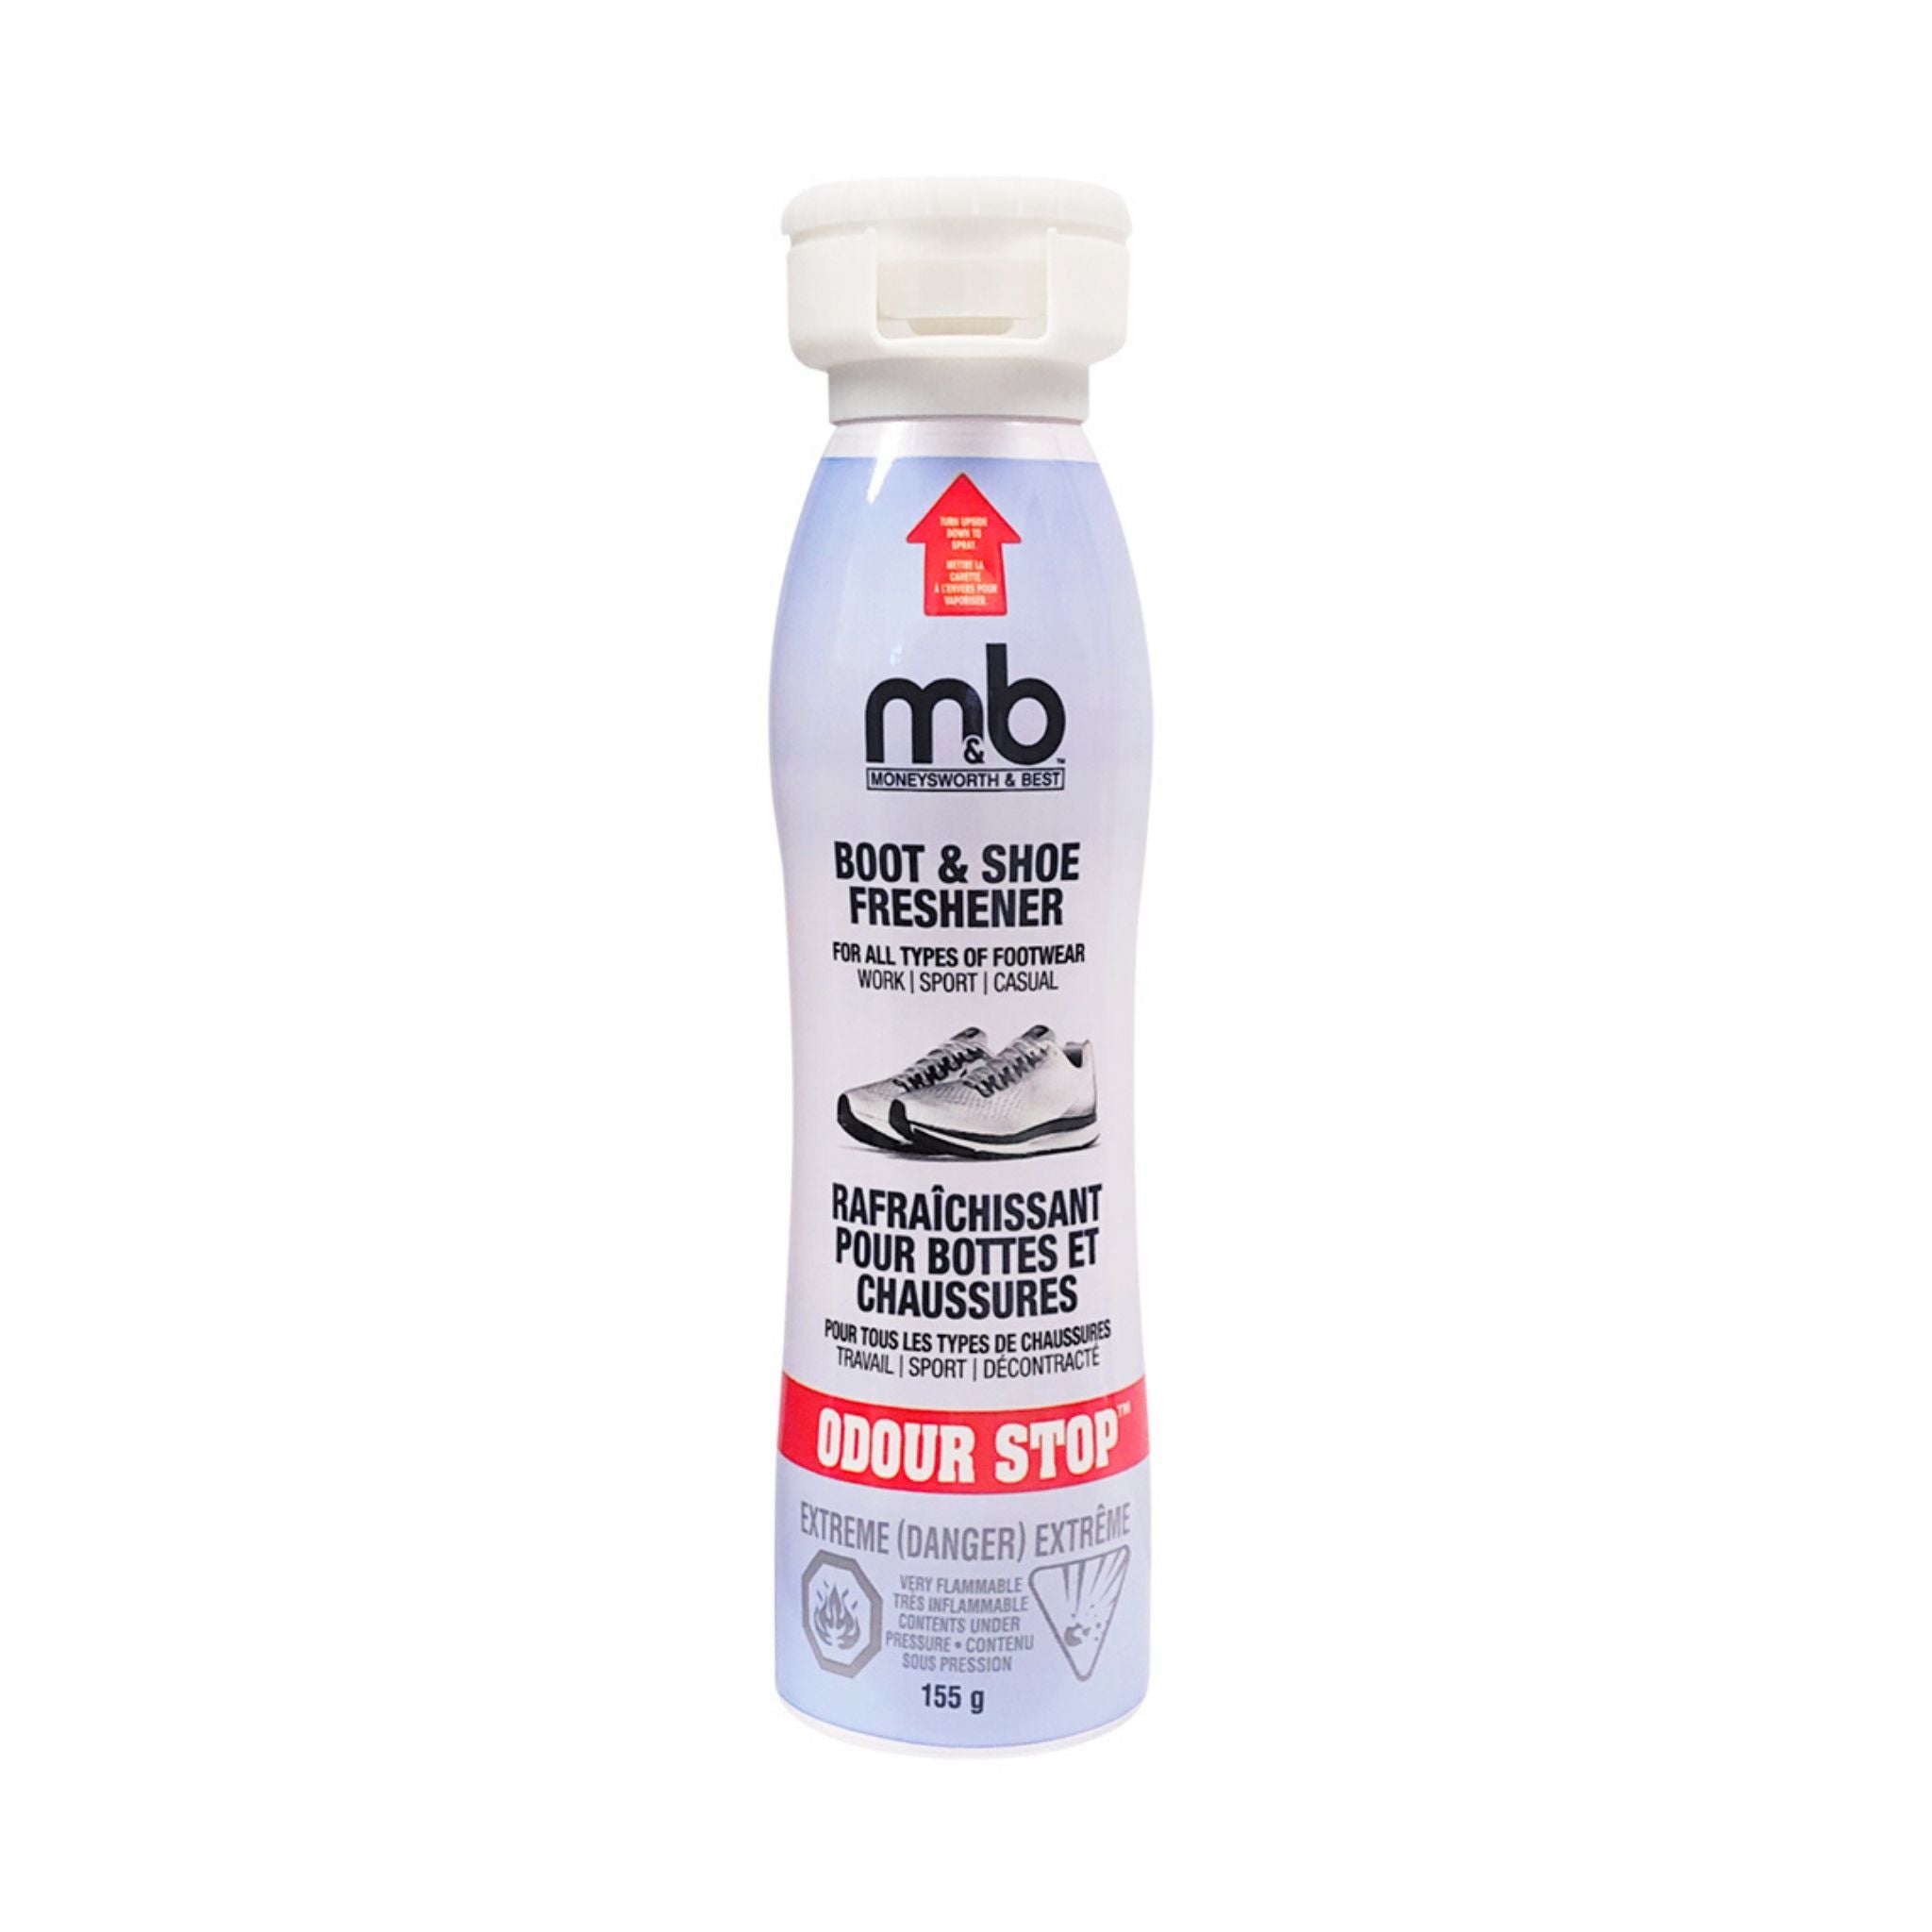 Spray can of Boot and Shoe Freshener, M&amp;B logo on white can